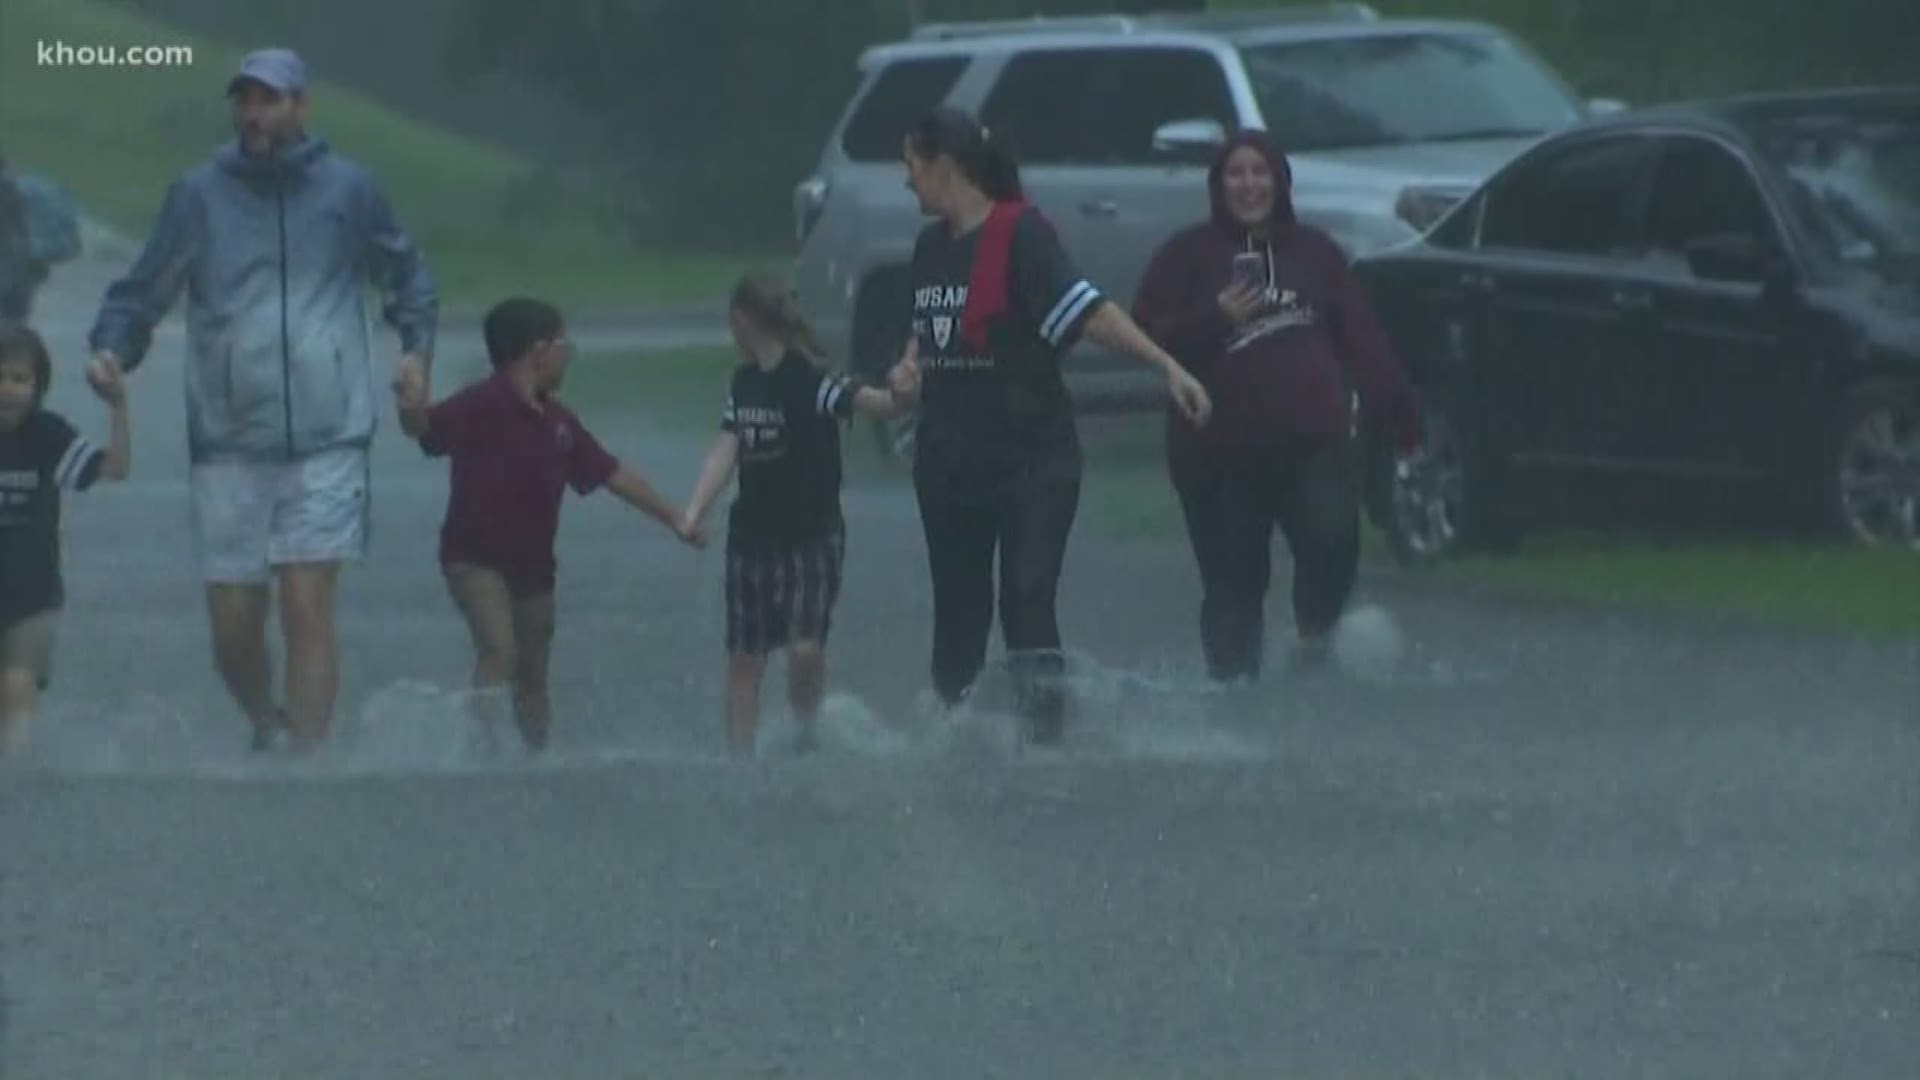 Heavy rain Tuesday caused multiple streets to flood, especially in Kingwood. Some residents were forced to evacuate their homes and cars as flood water continued to rise.